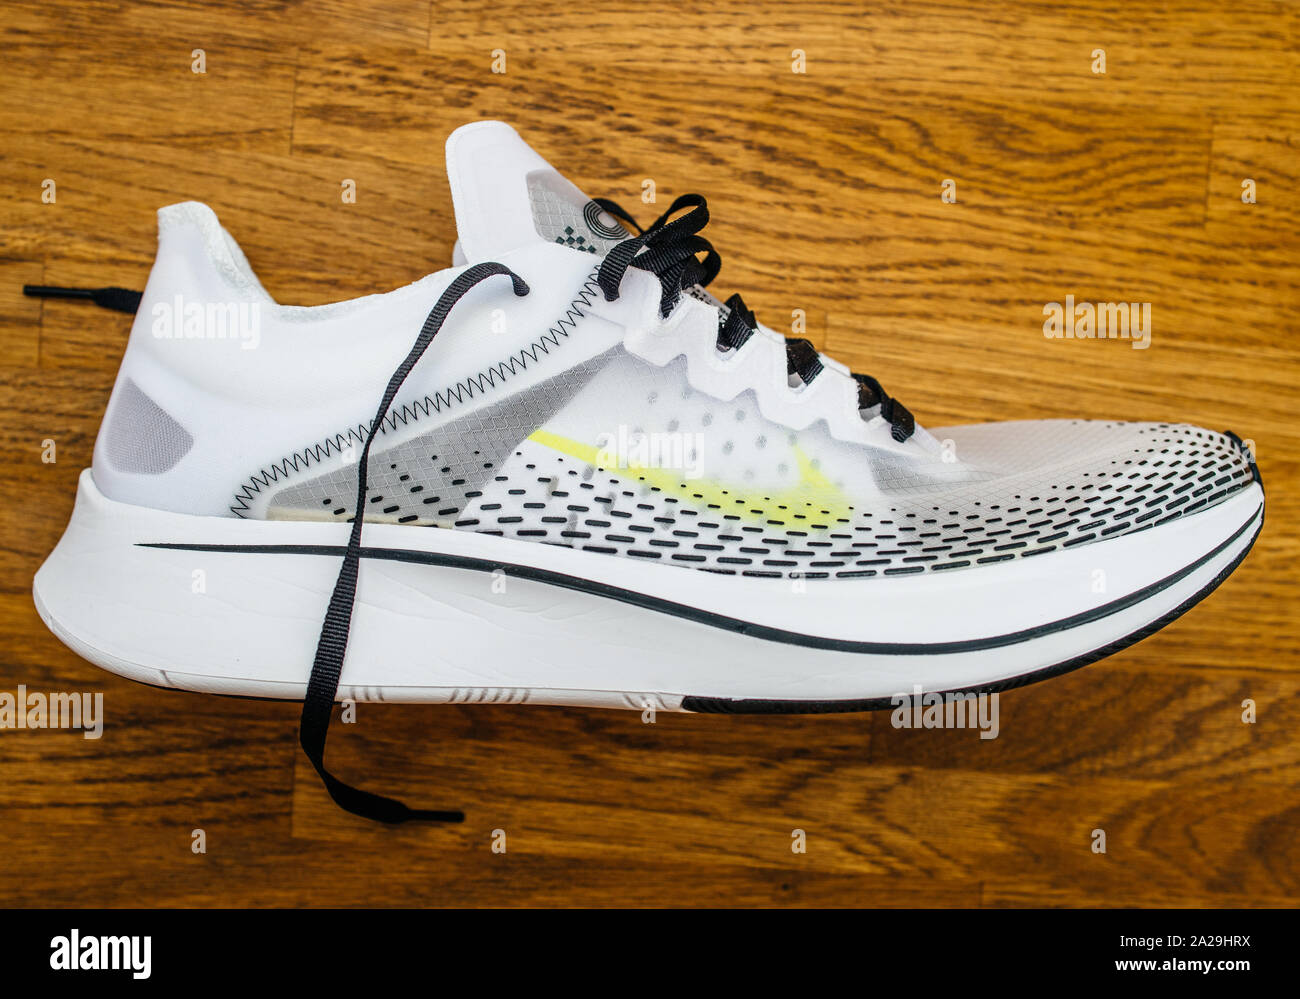 Paris, France - Jul 8, 2019: New professional Nike Zoom Fly SP Fast running  sport shoe on wooden floor Stock Photo - Alamy